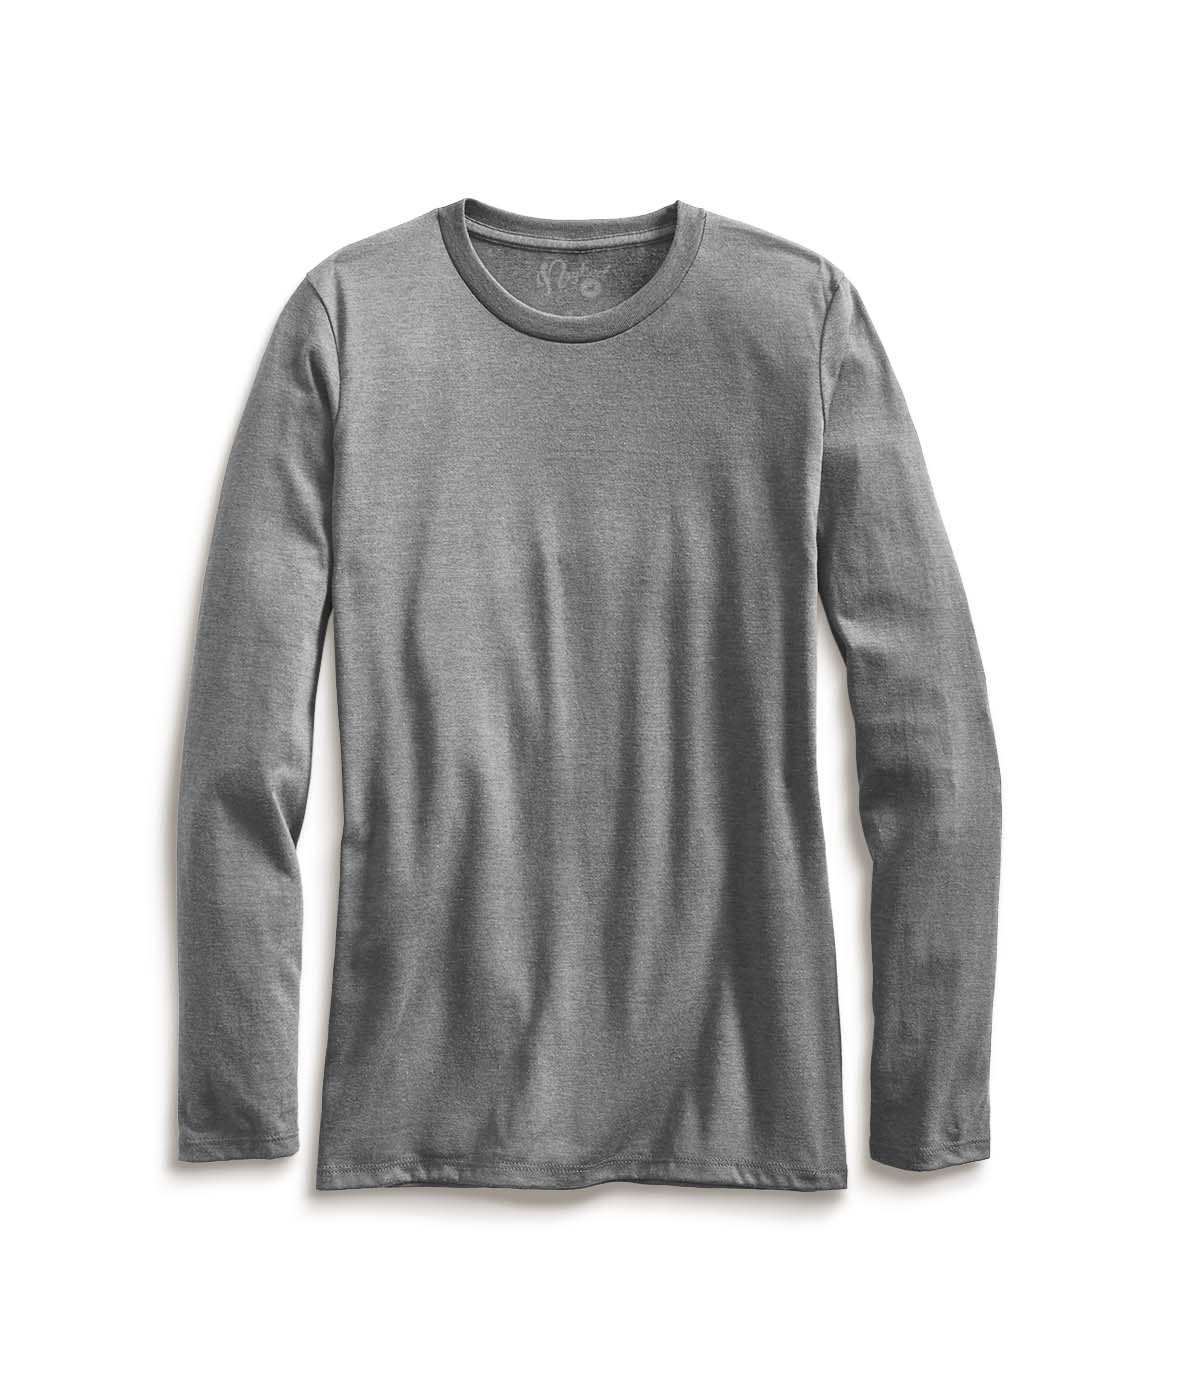 Women's Ridiculously Soft Recycled Lightweight Long Sleeve T-Shirt Worn by Model